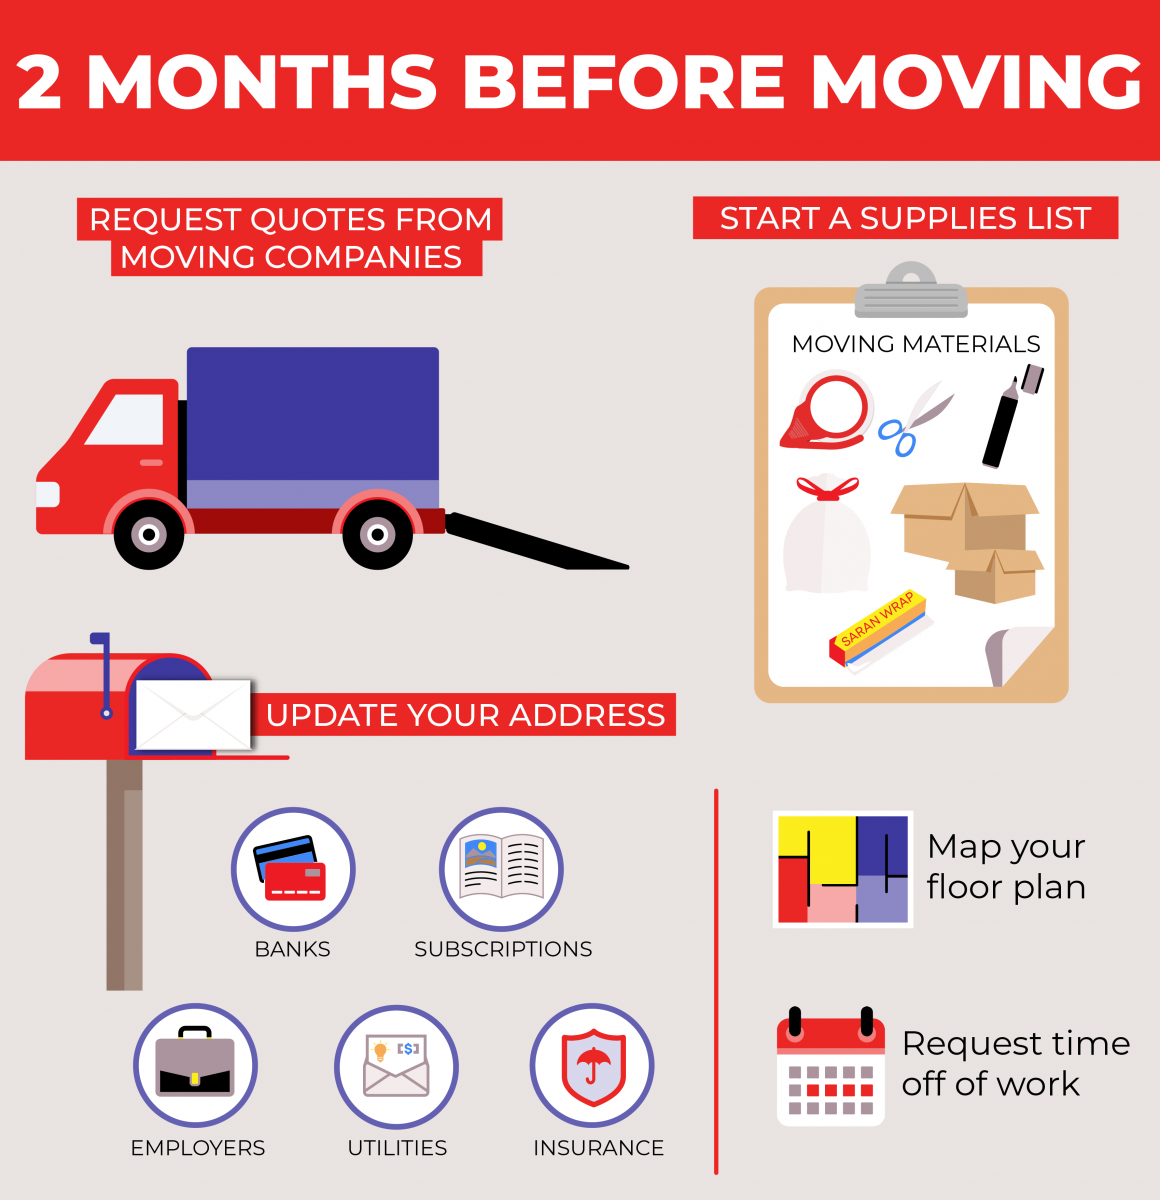 How to prep for your move 2 months before moving day.